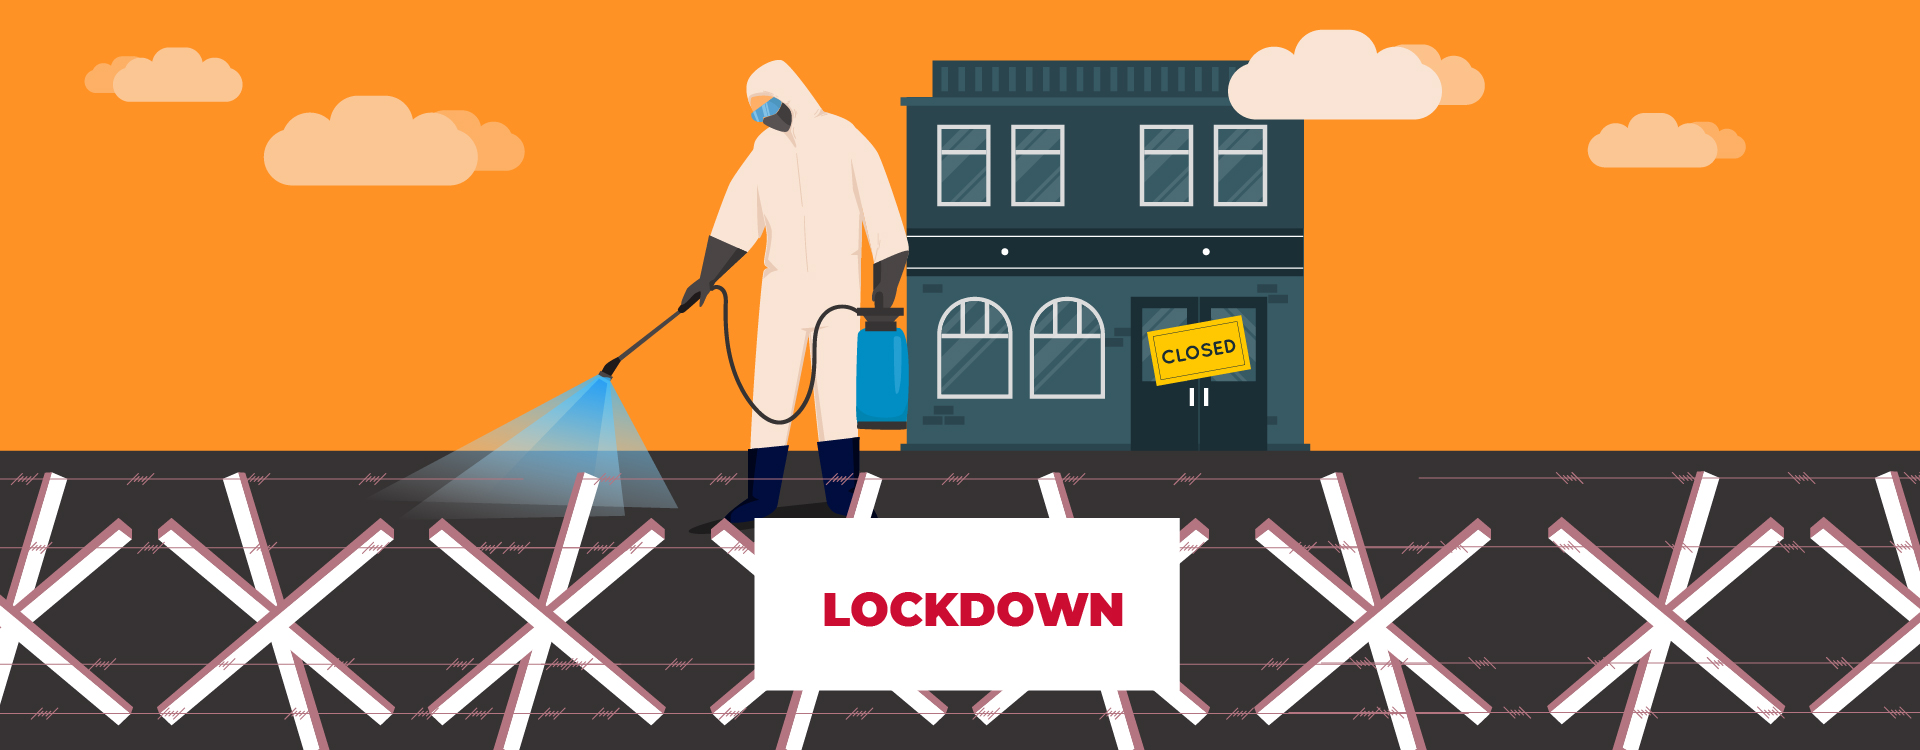 Lockdowns in India due to Covid1-9 and impact on small businesses